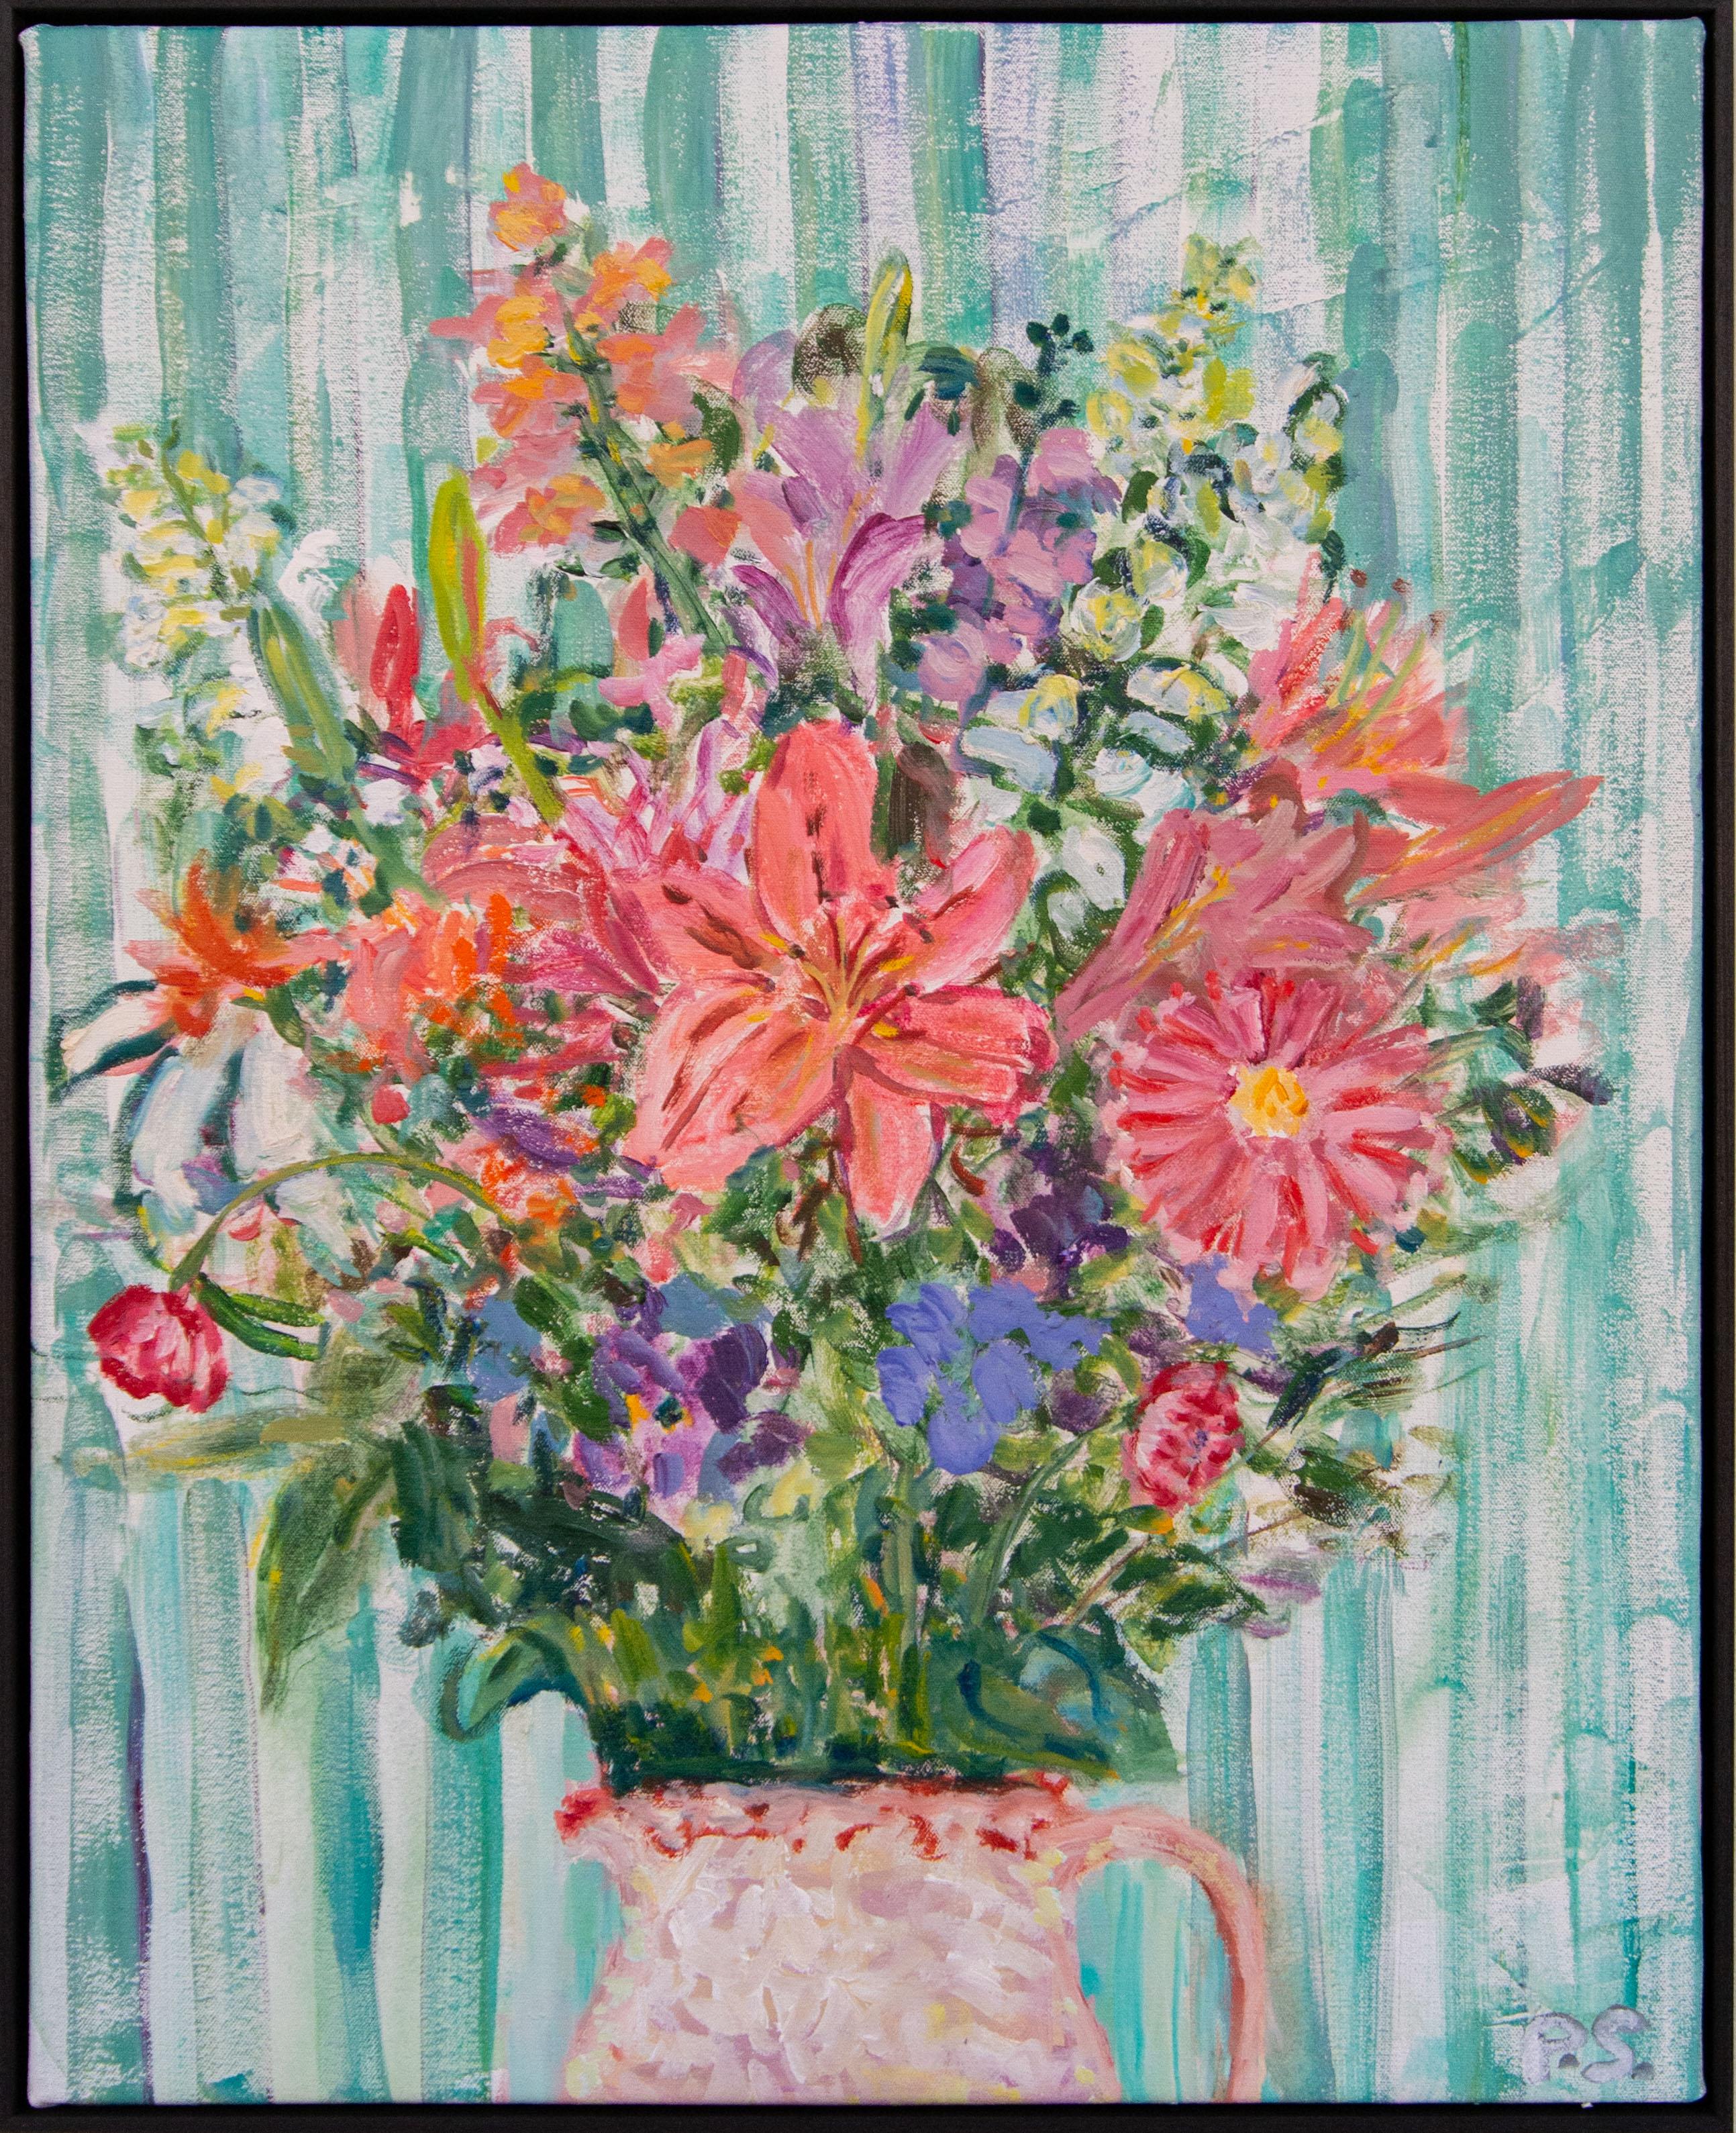 Fresh Flowers - contemporary, floral still life, acrylic and oil on canvas - Painting by Pat Service